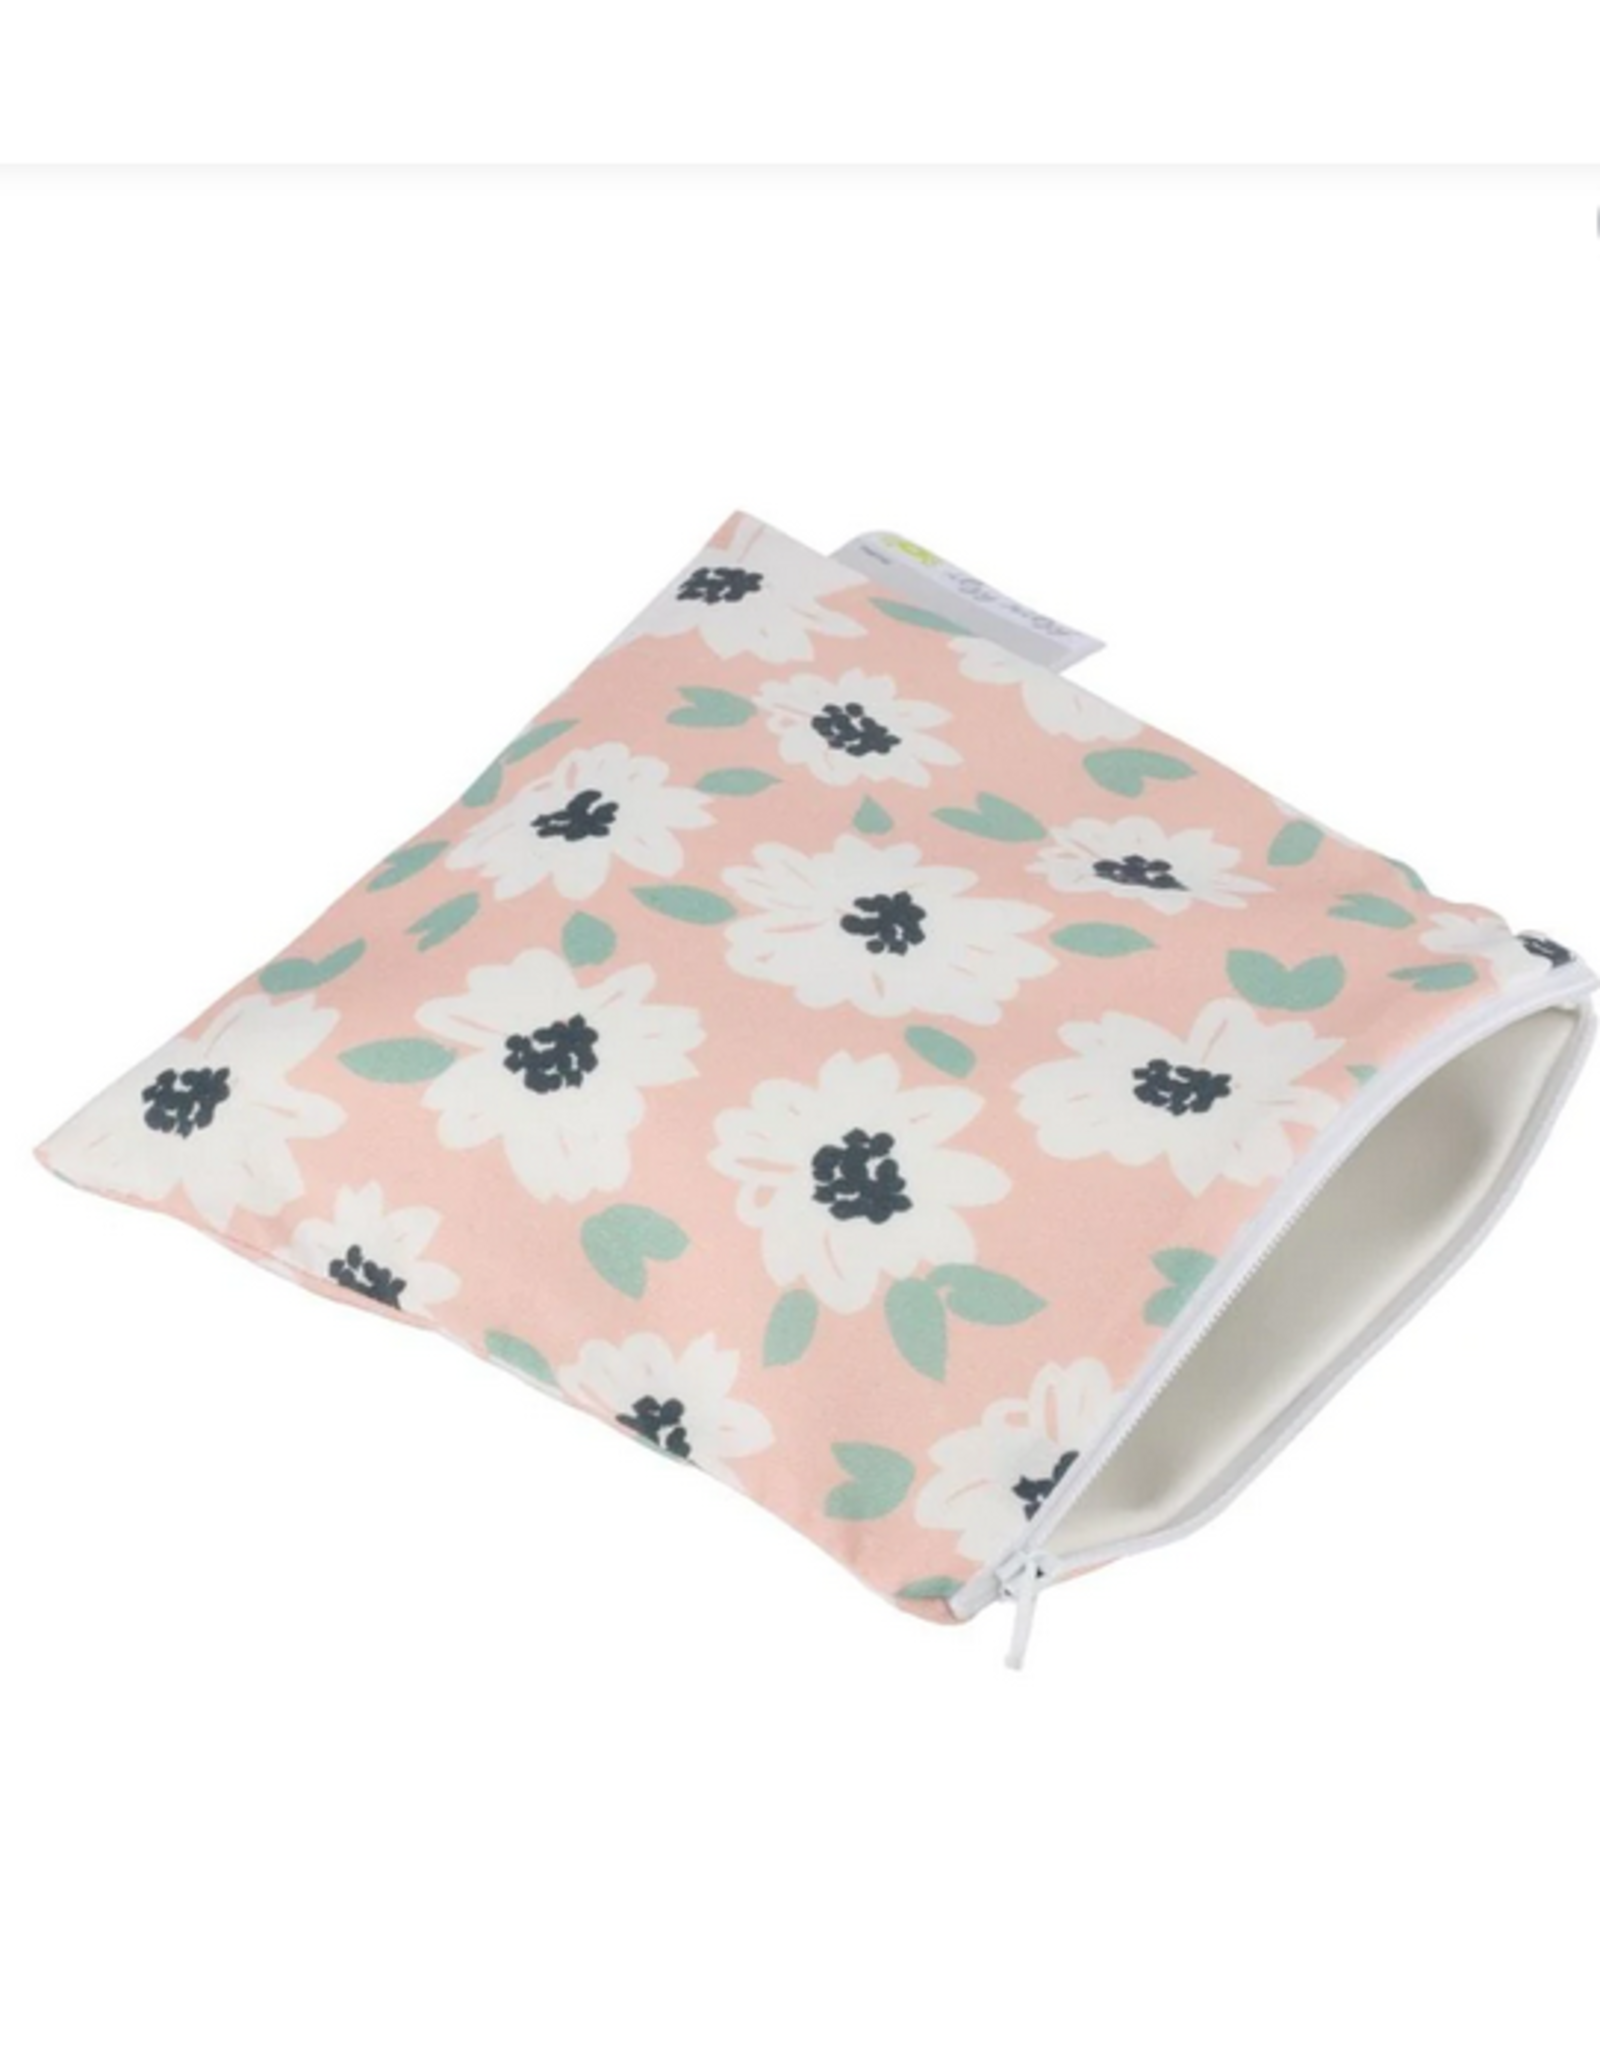 Itzy Ritzy Snack & Everything Bag - Playful Petals